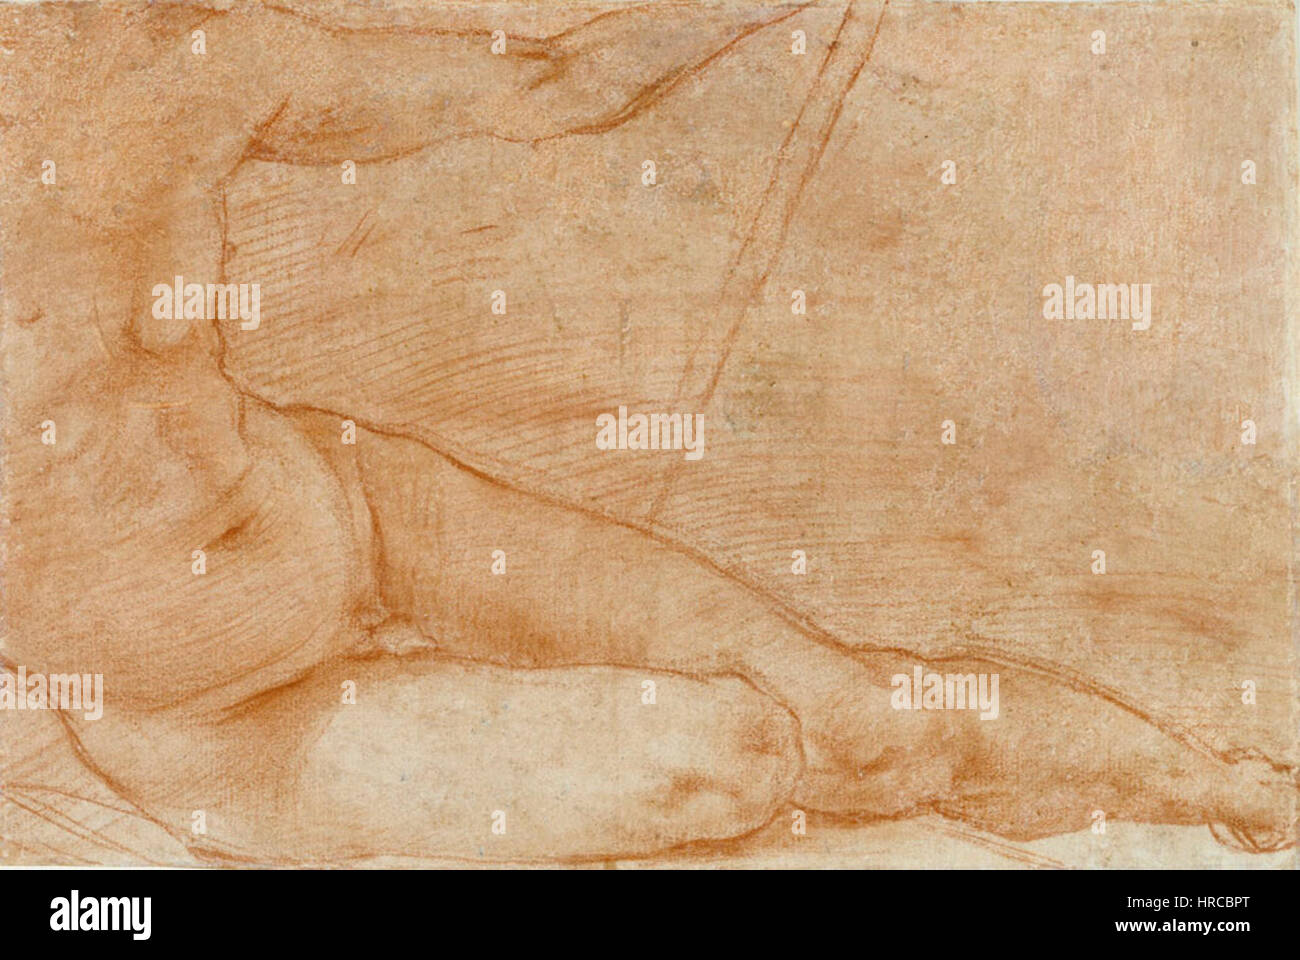 Reclining Figure by Pontormo (Jacopo Carucci), 1520, The J. Paul Getty Stock Photo